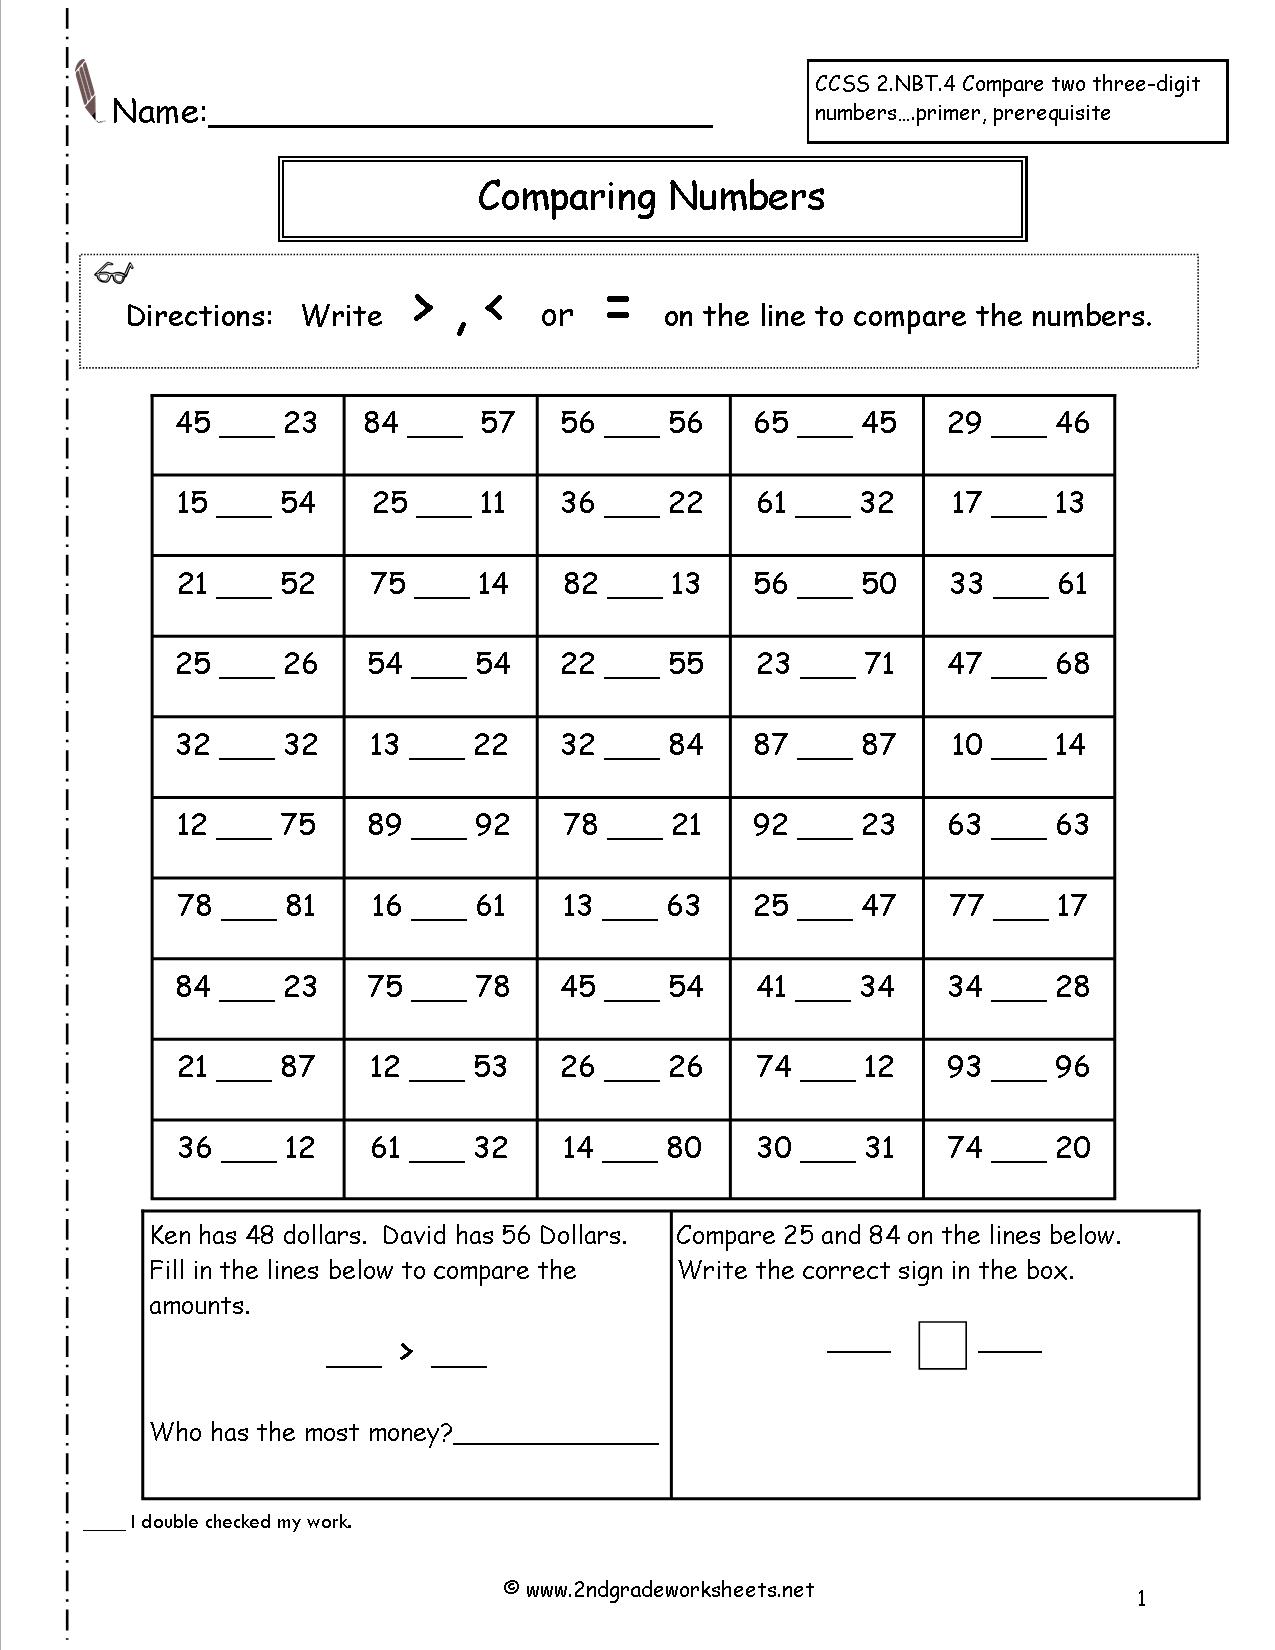 11-best-images-of-2nd-grade-comparing-numbers-worksheets-comparing